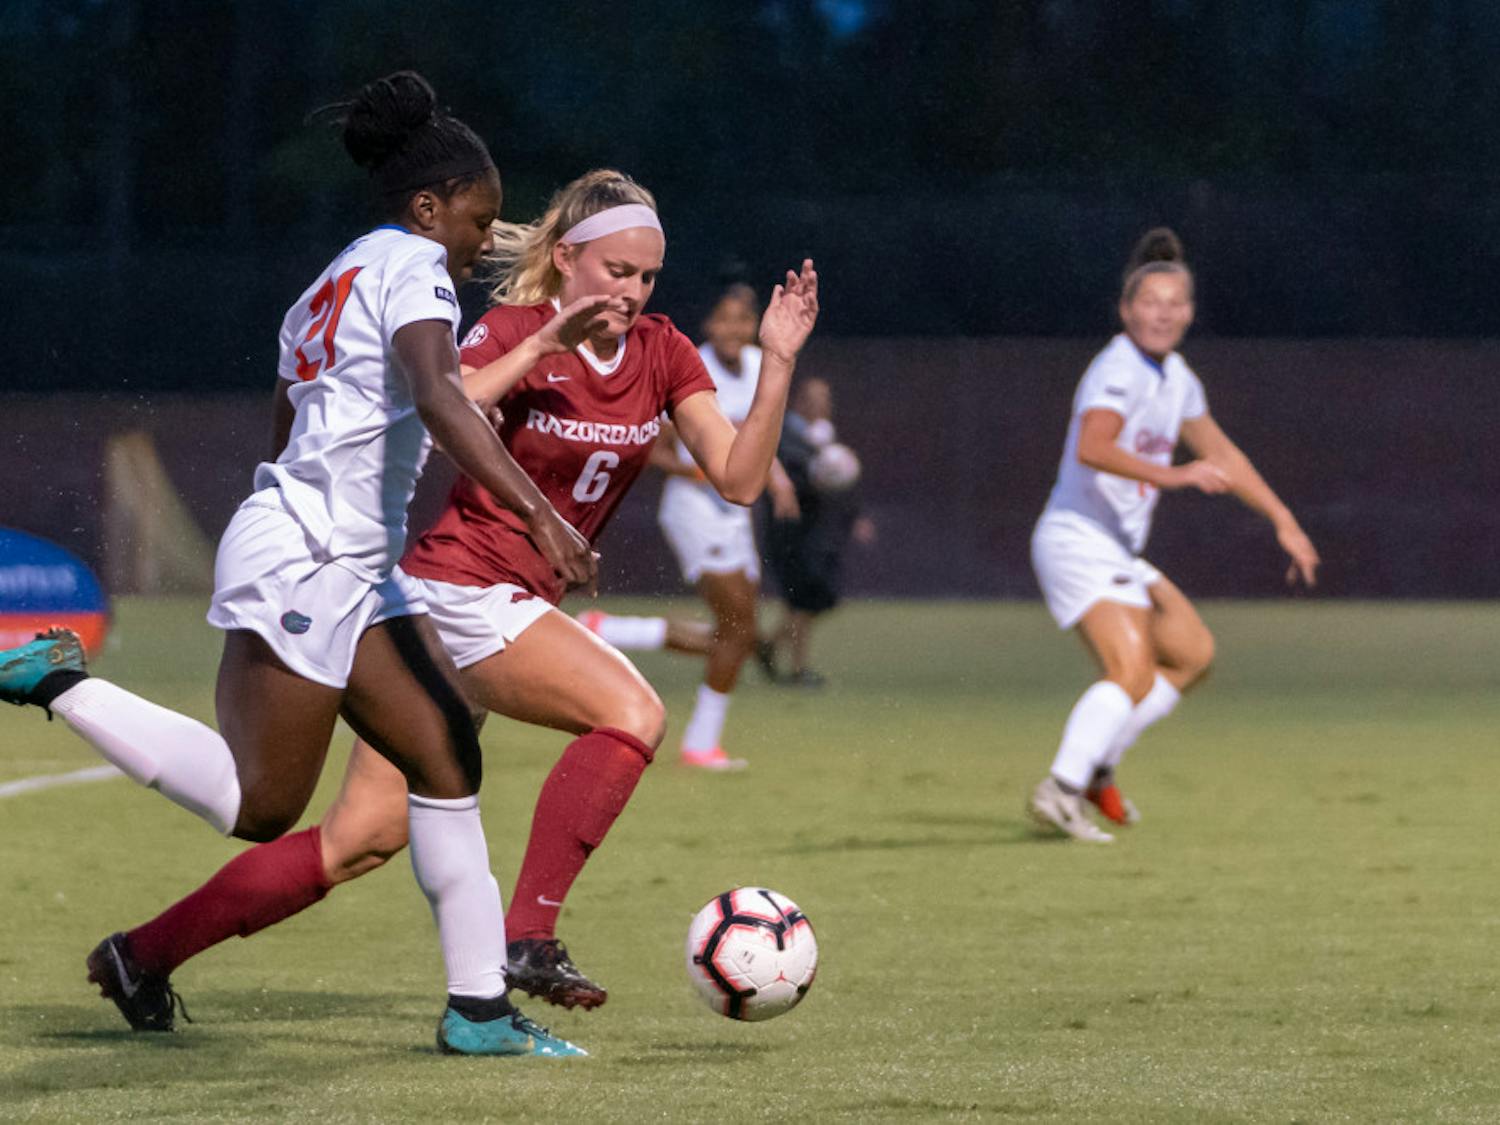 Forward Deanne Rose (21) scored her first goal of the season in Thursday night’s 3-0 win over Arkansas. She followed it with her second minutes later.